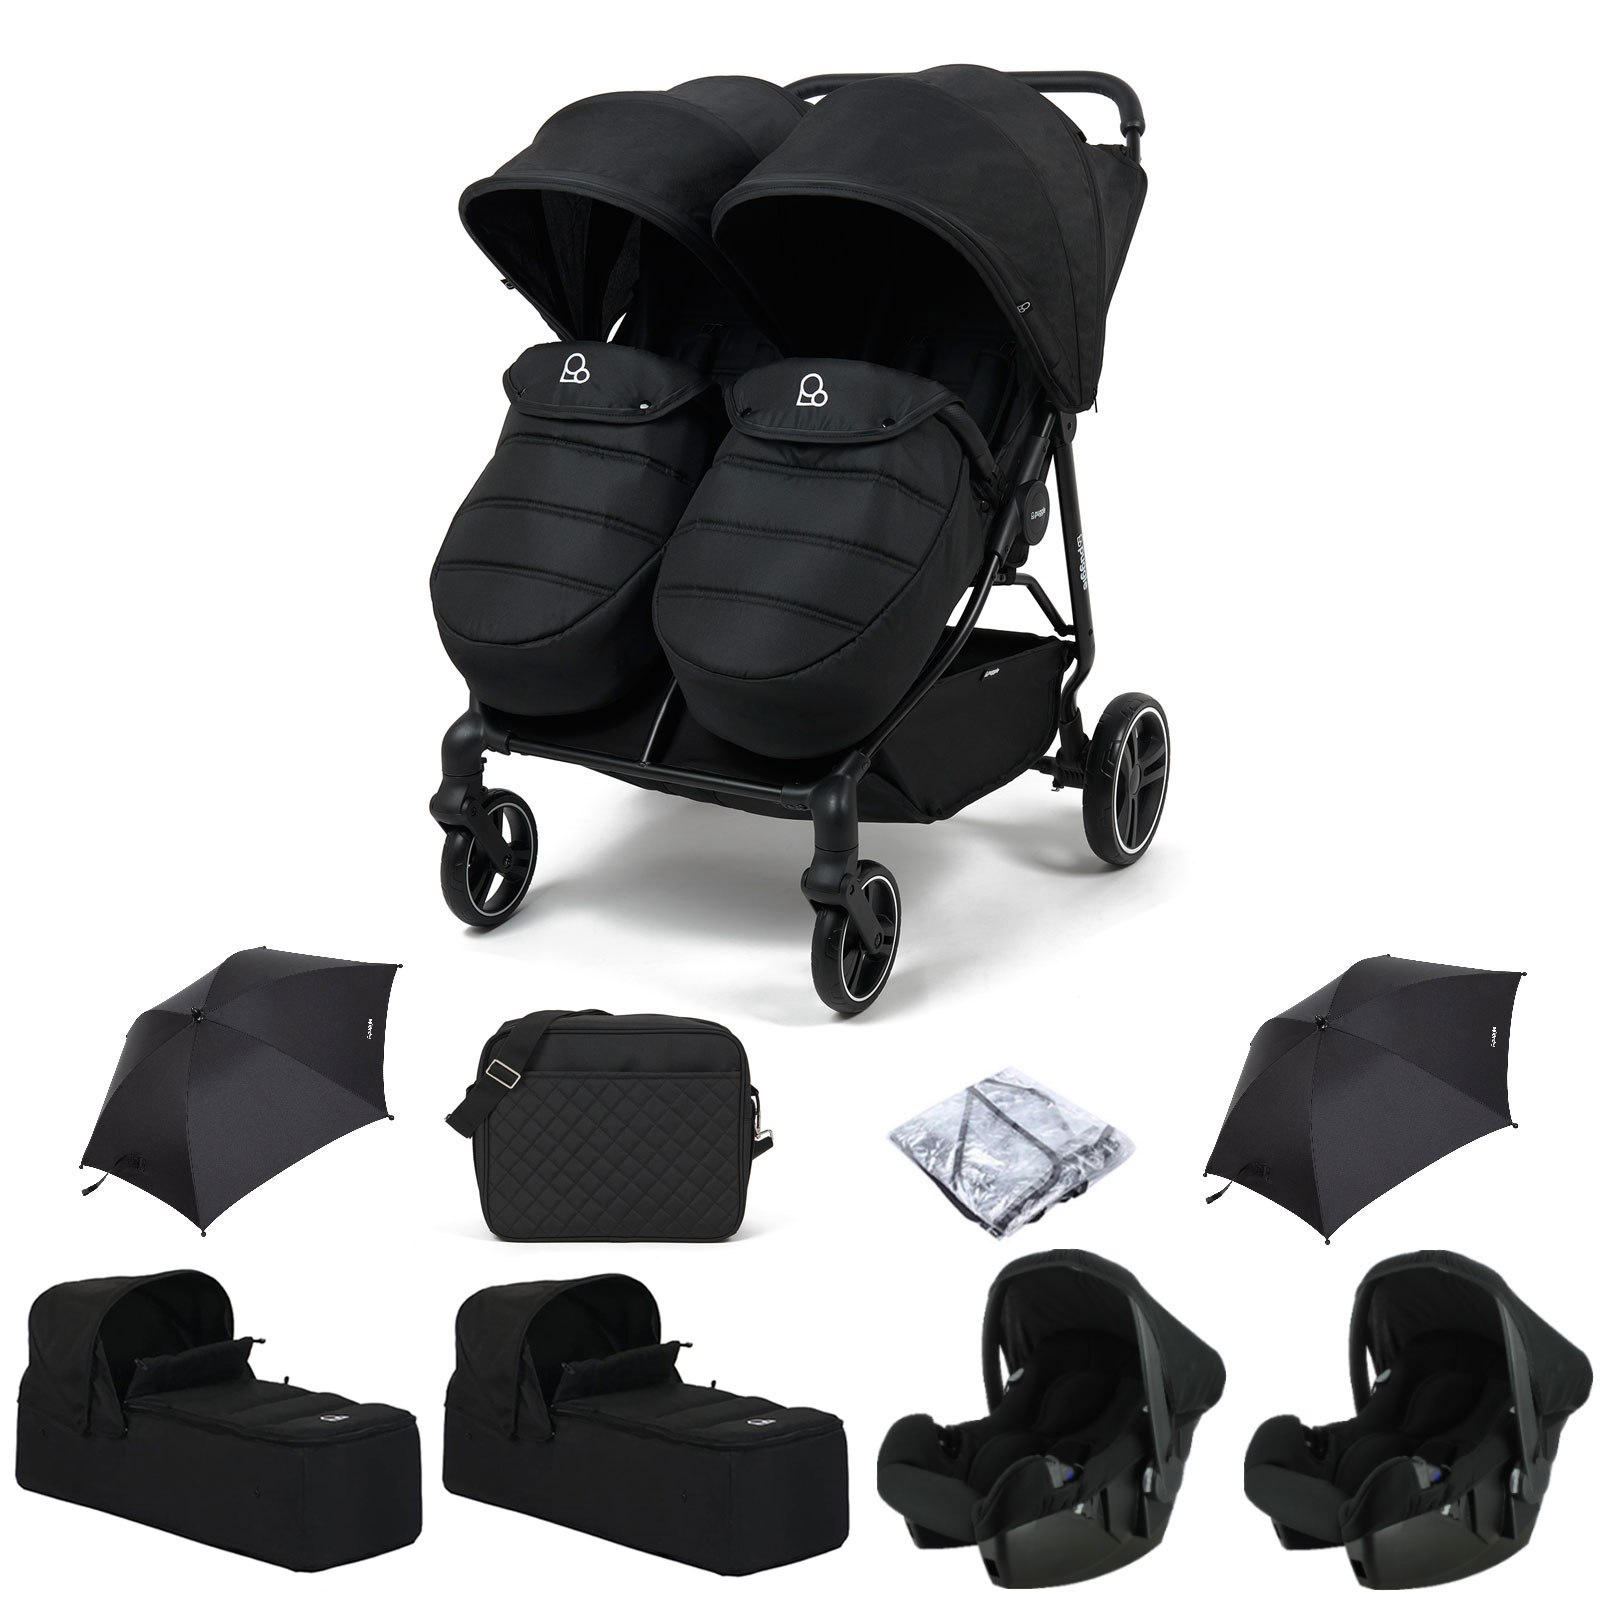 Puggle Urban City Easyfold Twin Pushchair with Footmuffs, 2 Beone Car Seats, 2 Soft Carrycots, 2 Parasols & Changing Bag - Storm Black